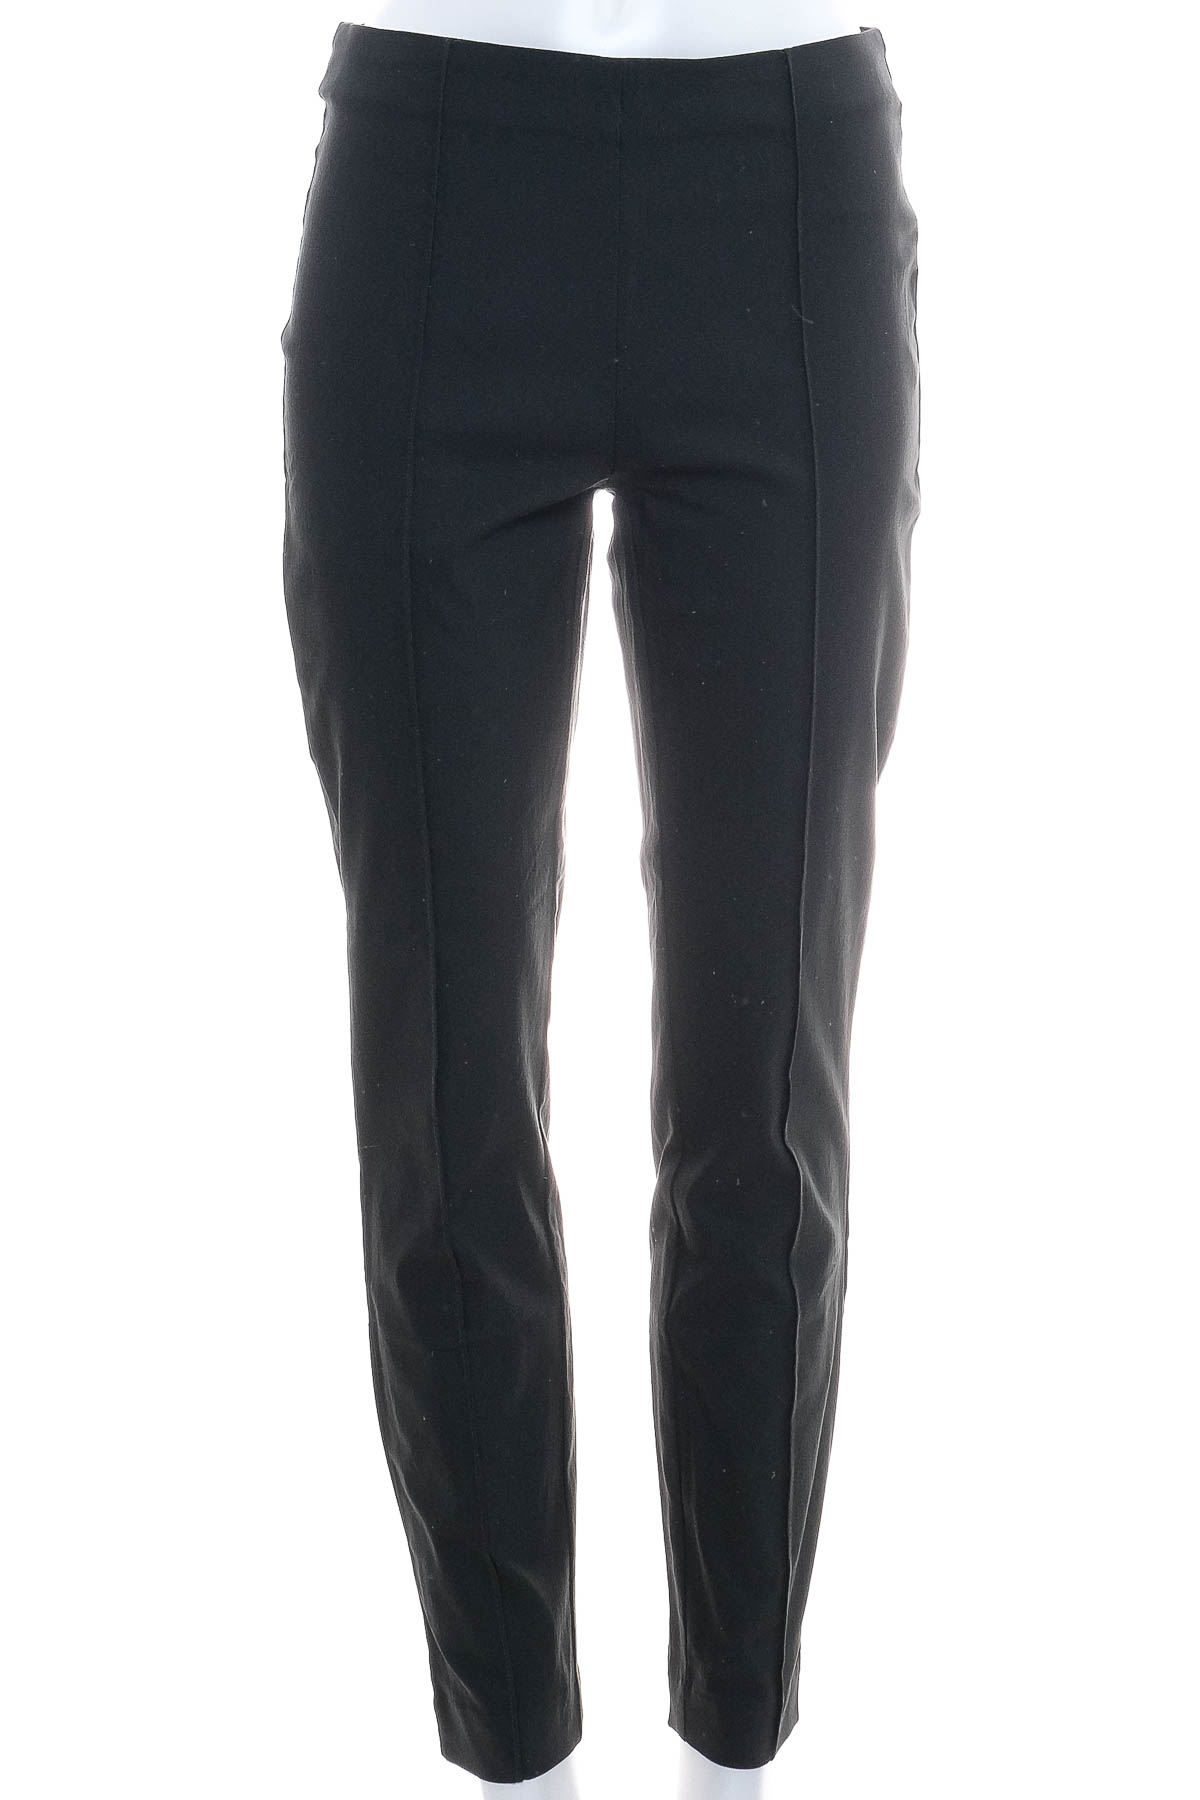 Women's trousers - Essentials by Tchibo - 0